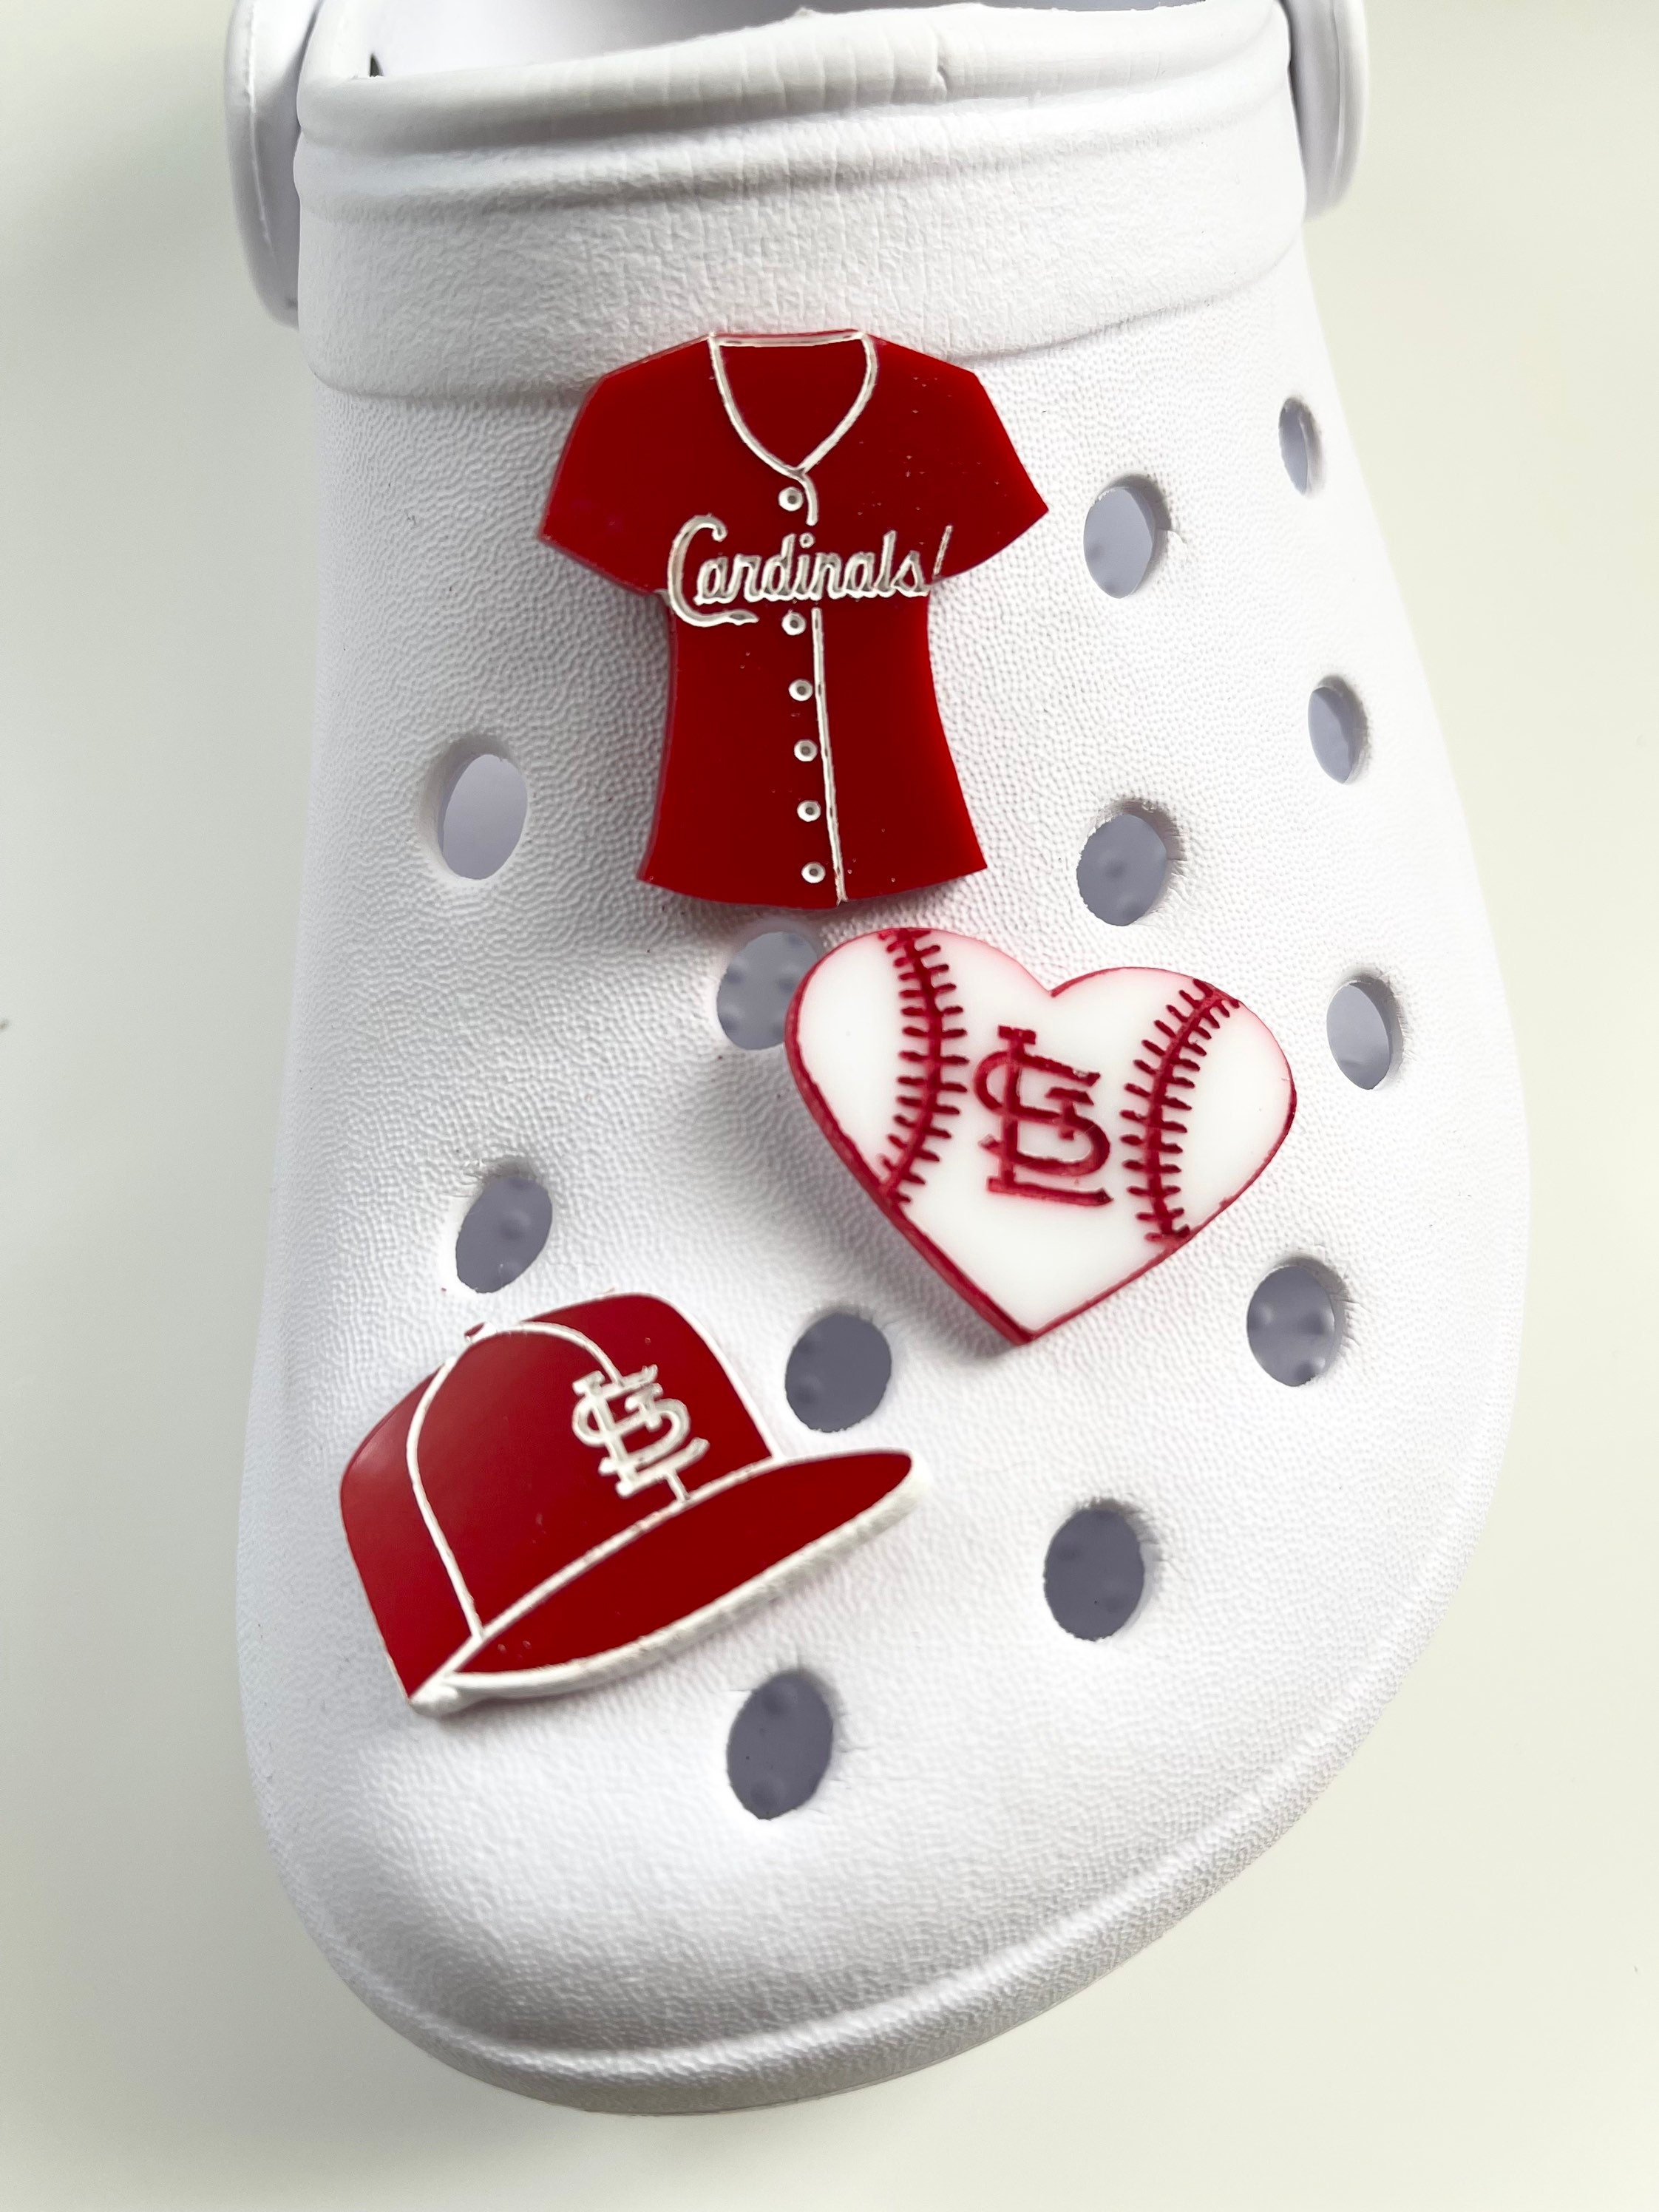 ST LOUIS CARDINALS BASEBALL CHARM 3/4 ACROSS x 3/4 IN LENGTH TEAM HEART  SLIDE PENDANT FOR YOUR NECKLACE EUROPEAN CHARM BRACELET (Fits Most Name